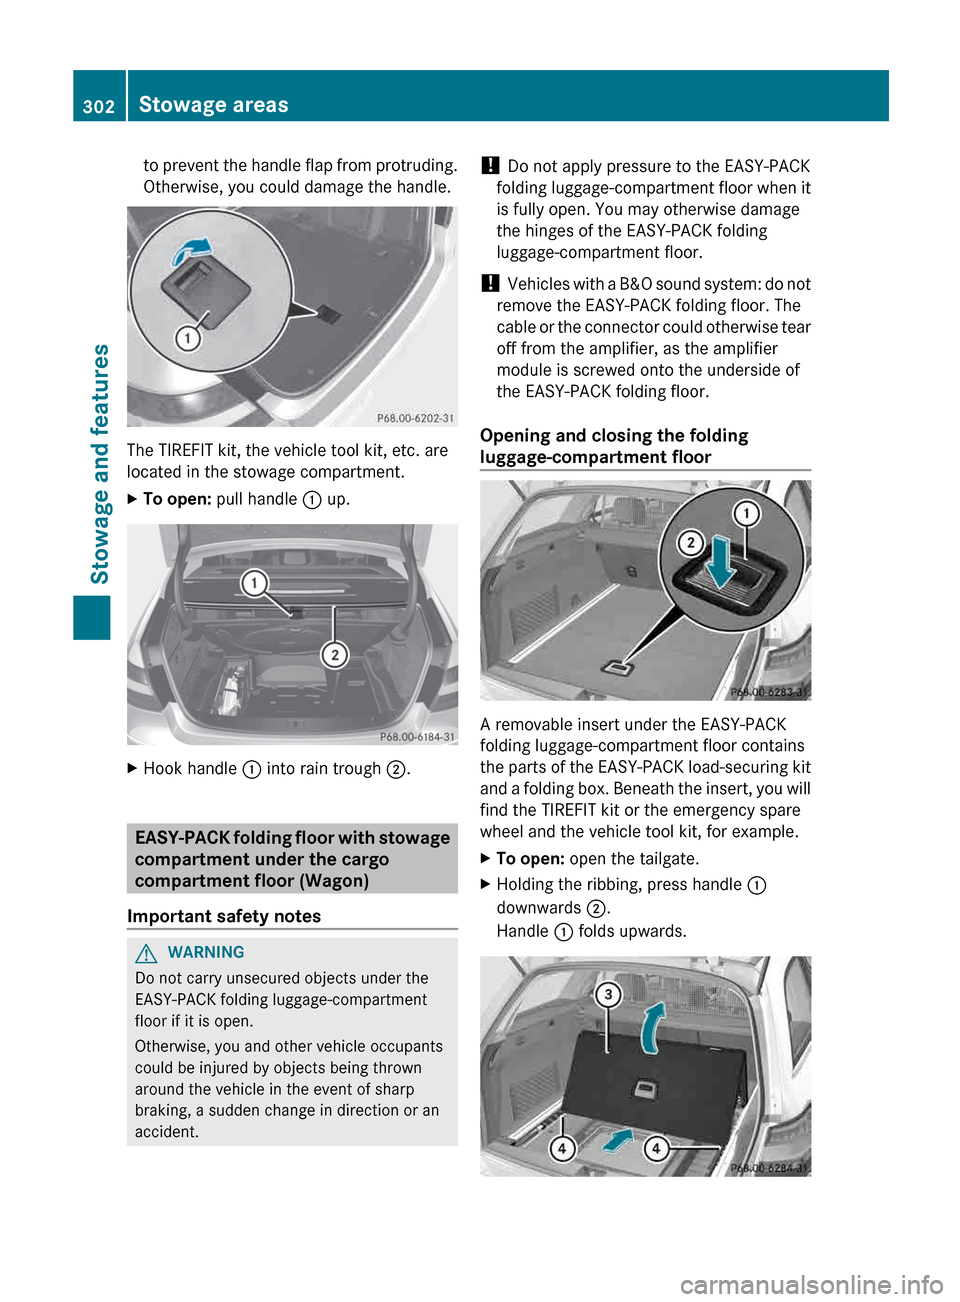 MERCEDES-BENZ E-Class SEDAN 2013 W212 Owners Guide to prevent the handle flap from protruding.
Otherwise, you could damage the handle.
The TIREFIT kit, the vehicle tool kit, etc. are
located in the stowage compartment.
X
To open: pull handle  : up.X
H